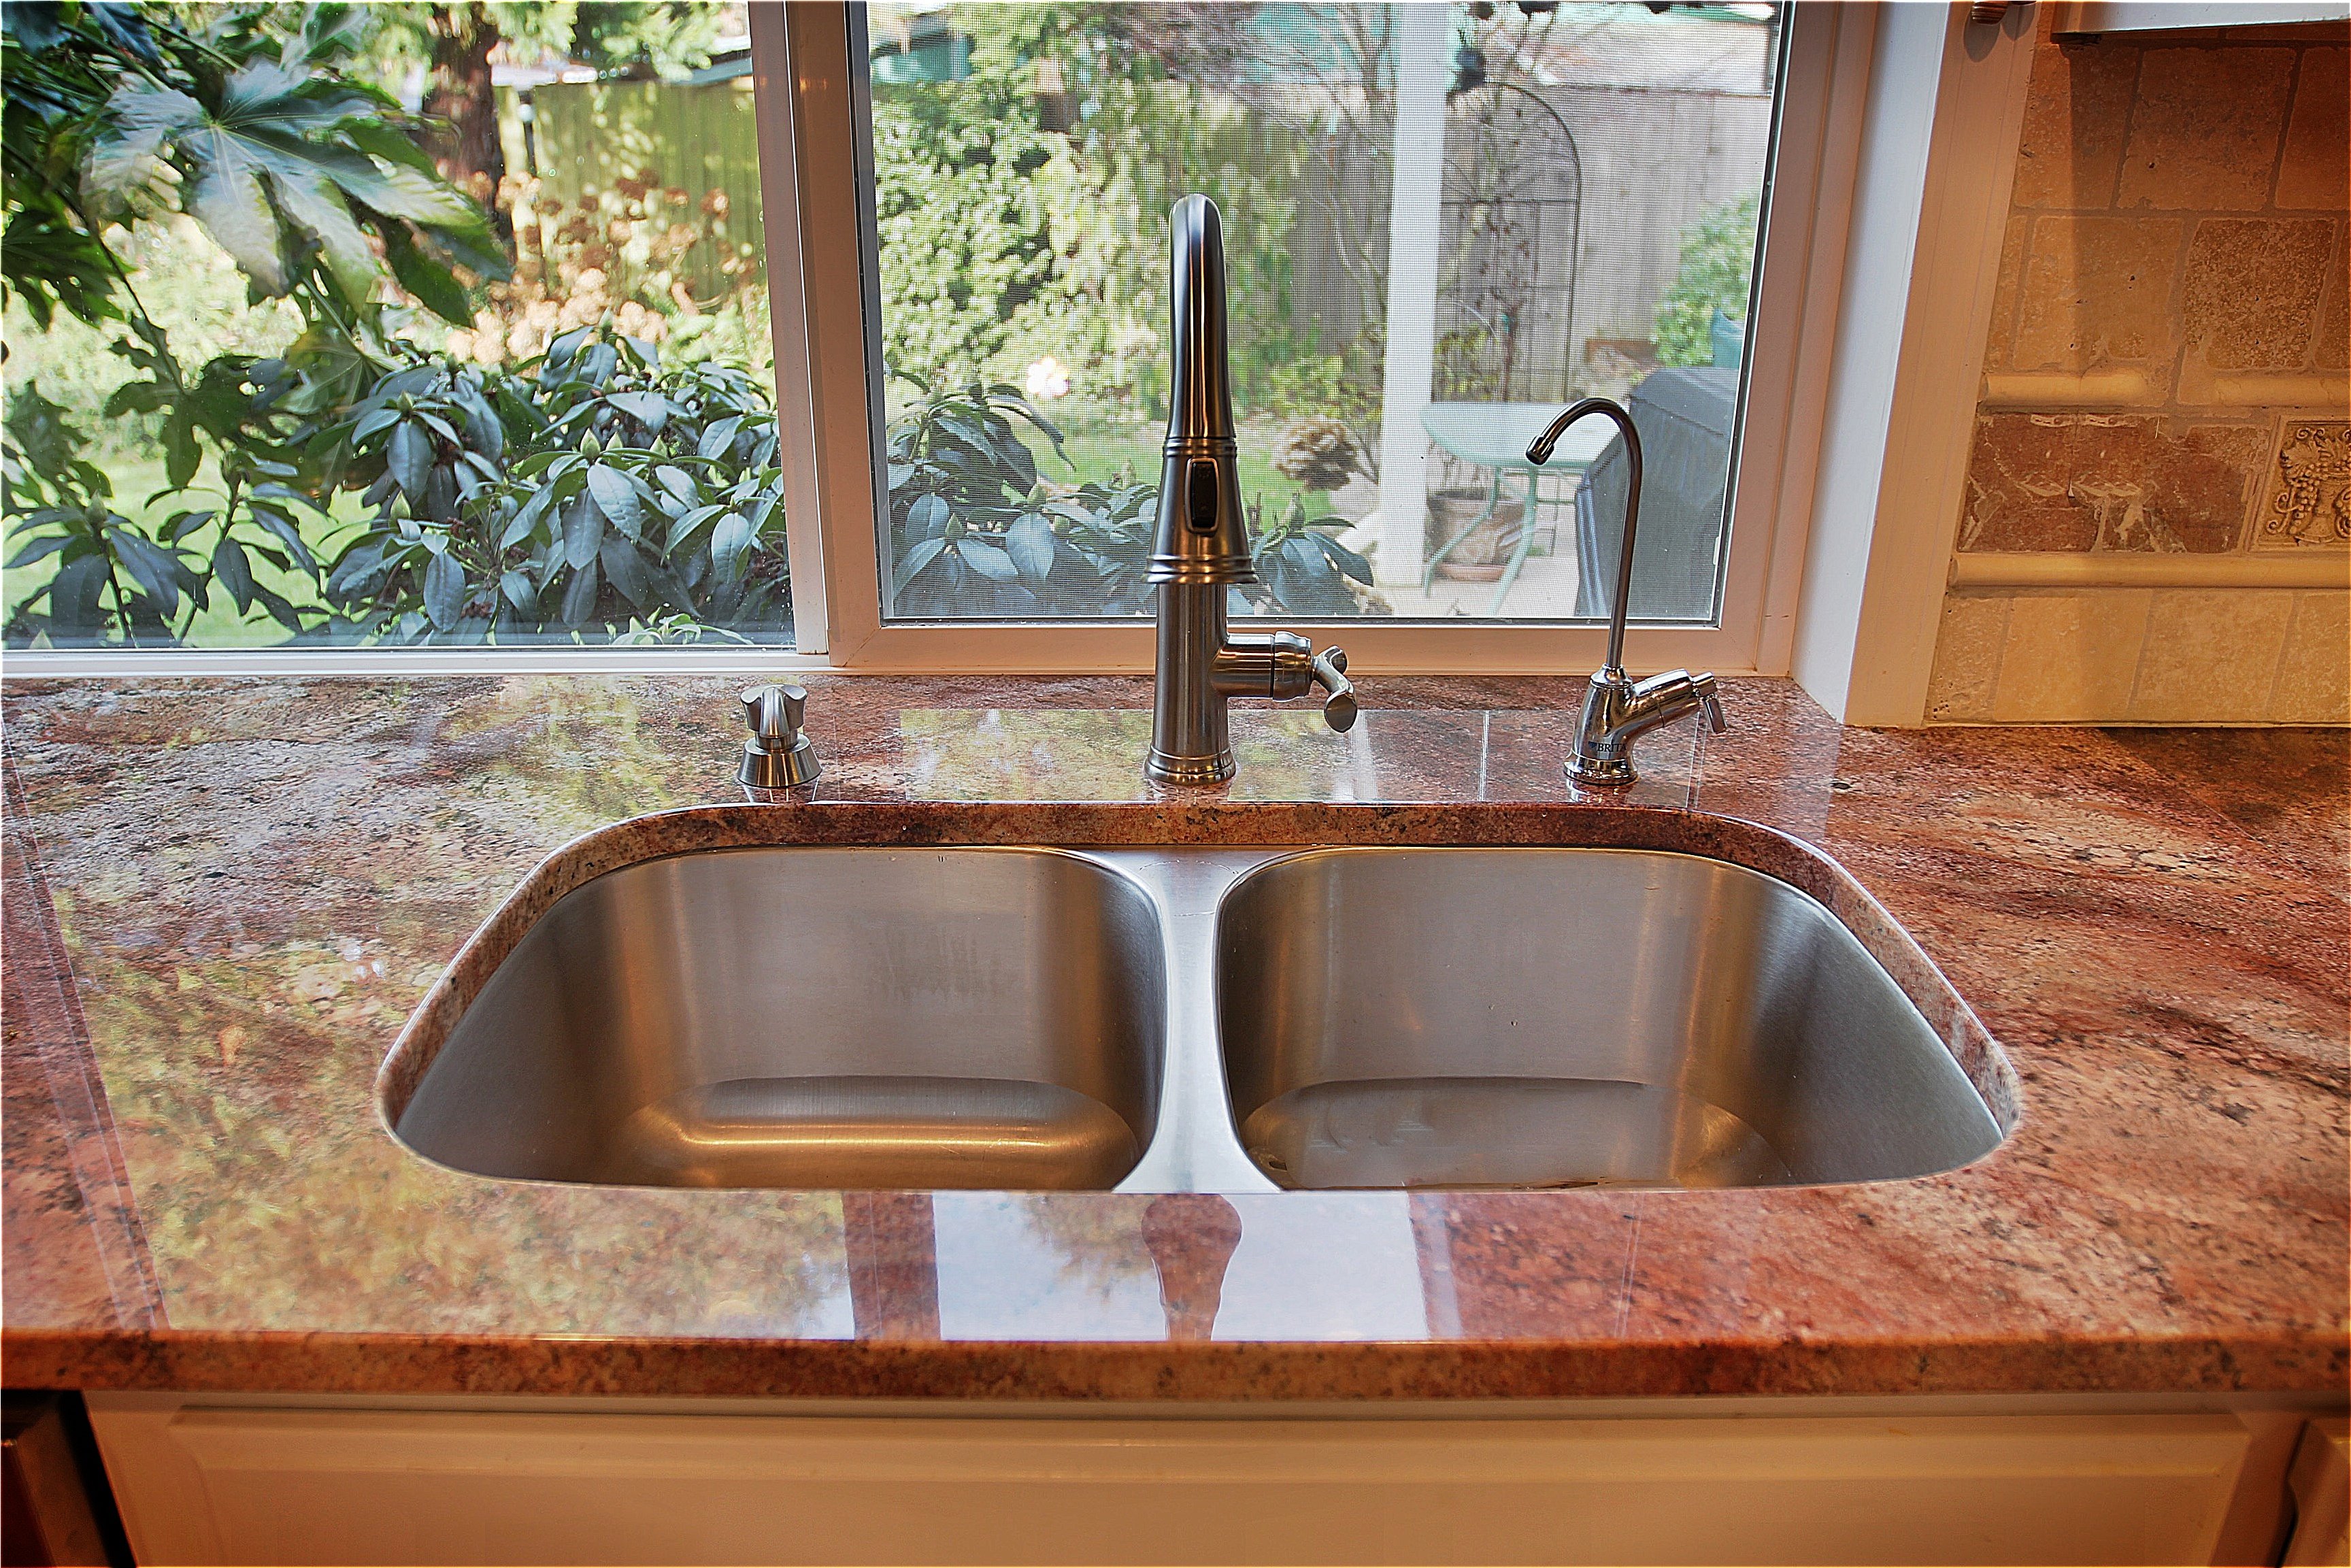 attaching a kitchen sink to granite counter top